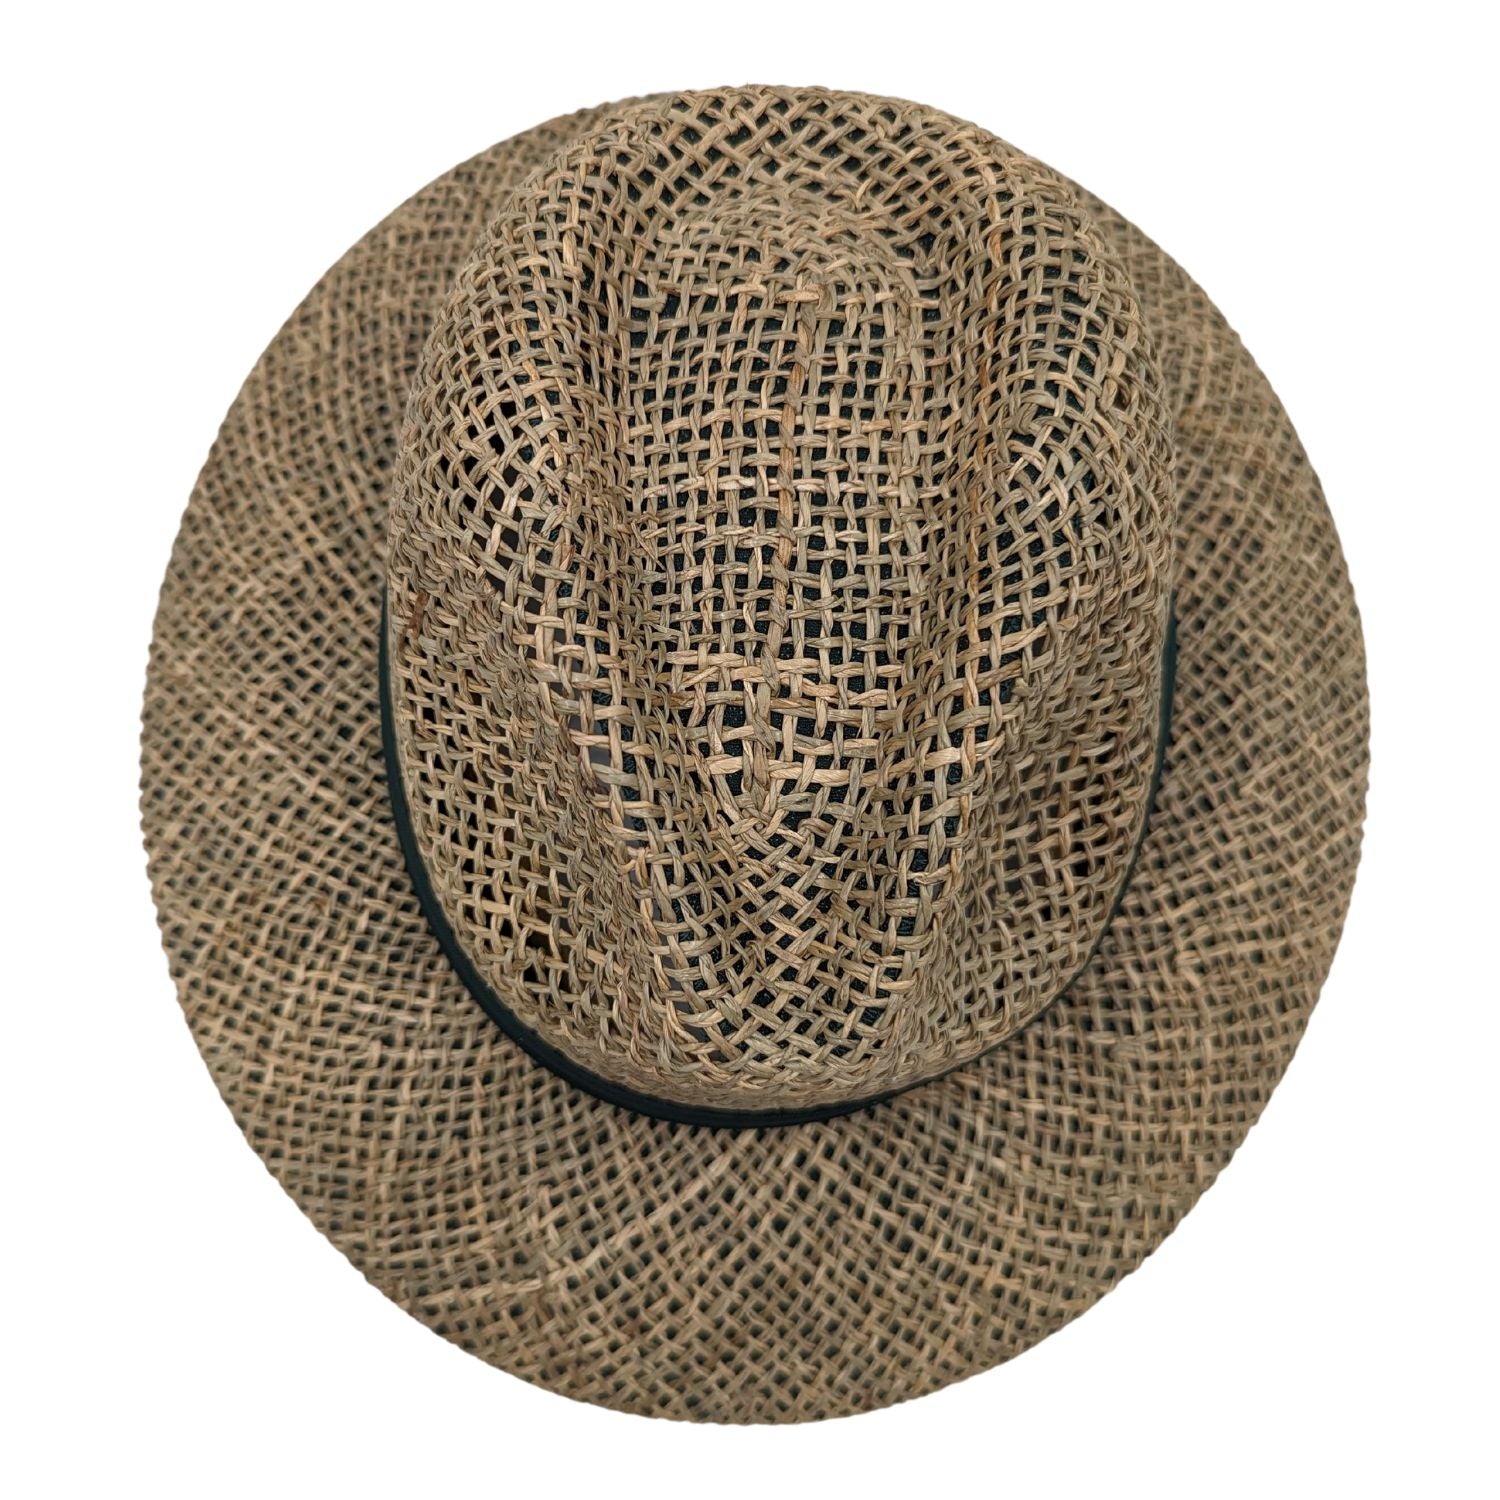 Men's Natural Twisted Seagrass Safari Hat with 3 Brim and Cotton Band in  Dark Green – Suits & More